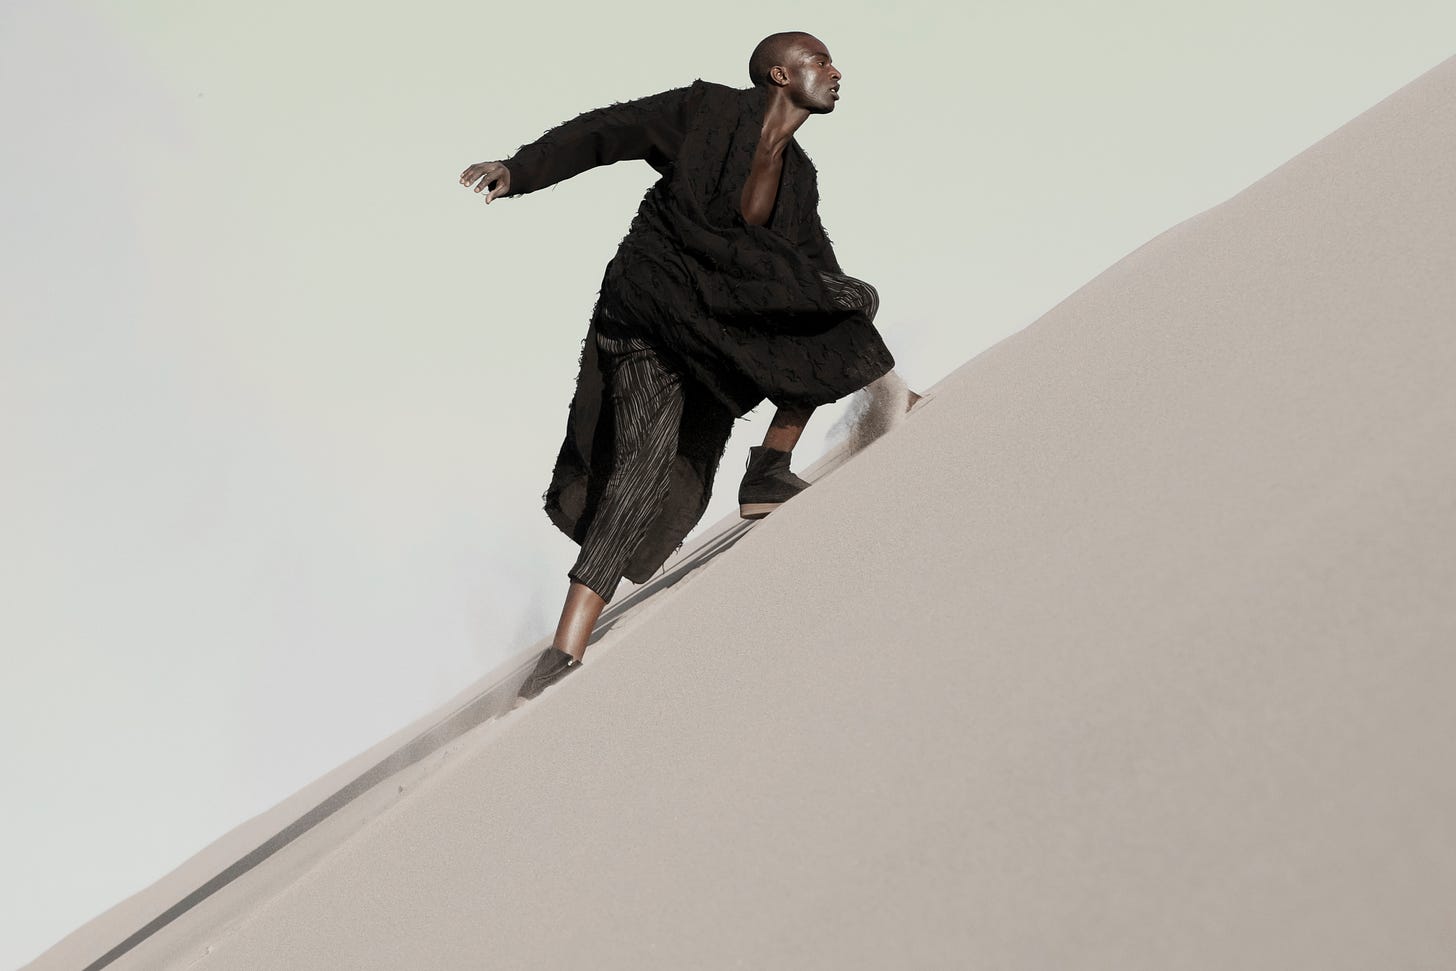 A model wearing a loose black jacket and trousers, dashing up a slope of desert sand. Photograph by Rob Daly for Abasi Rosborough